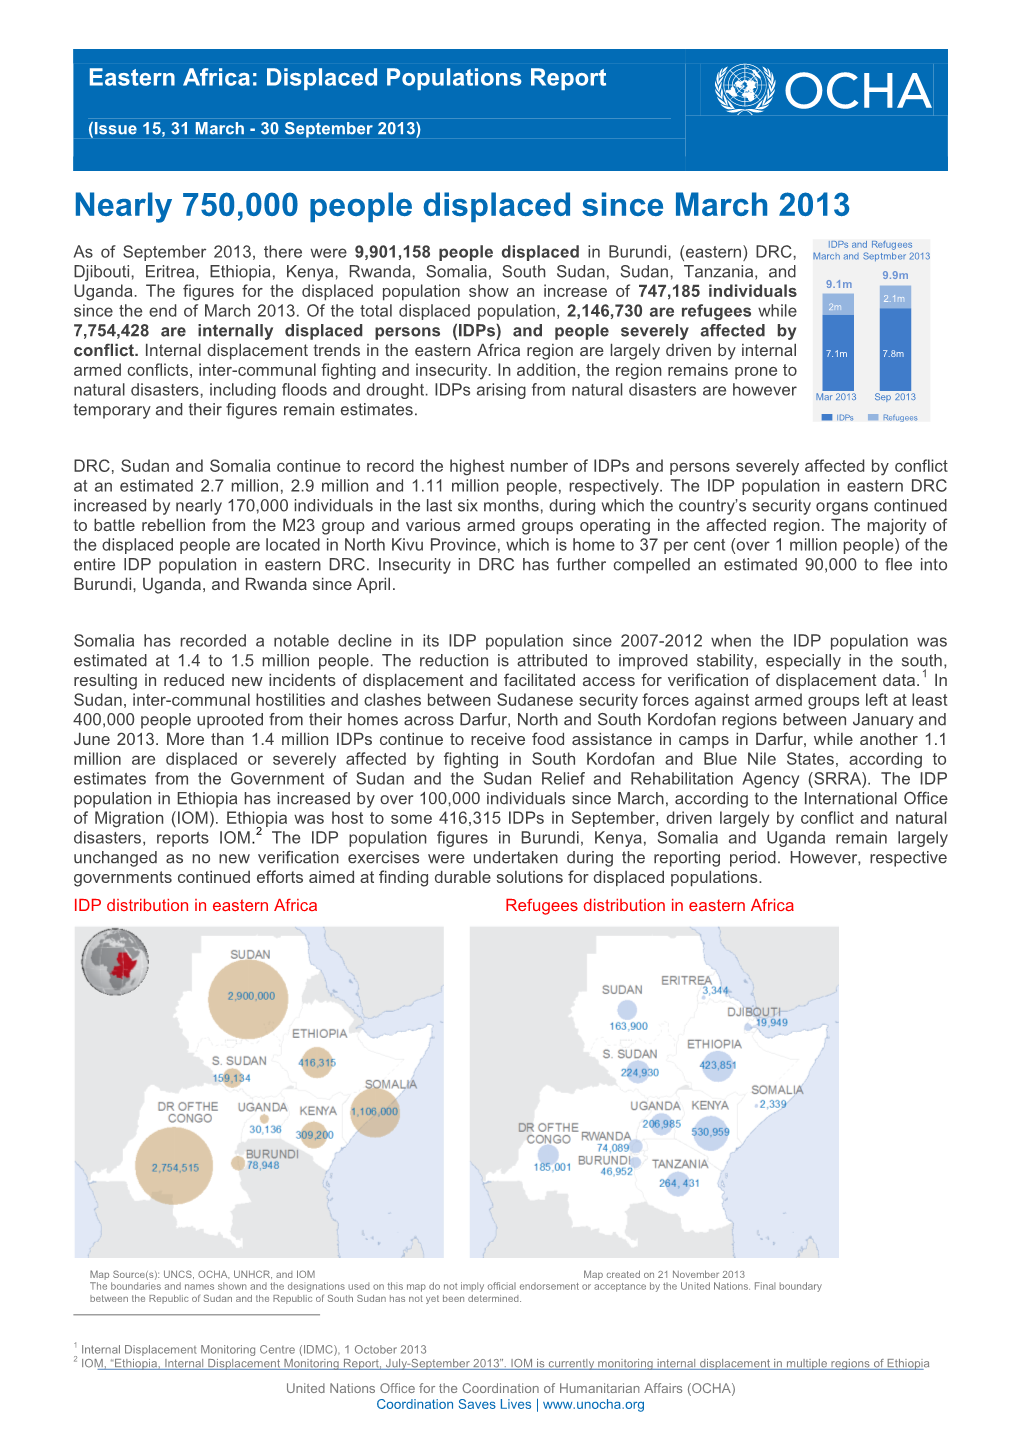 Nearly 750,000 People Displaced Since March 2013